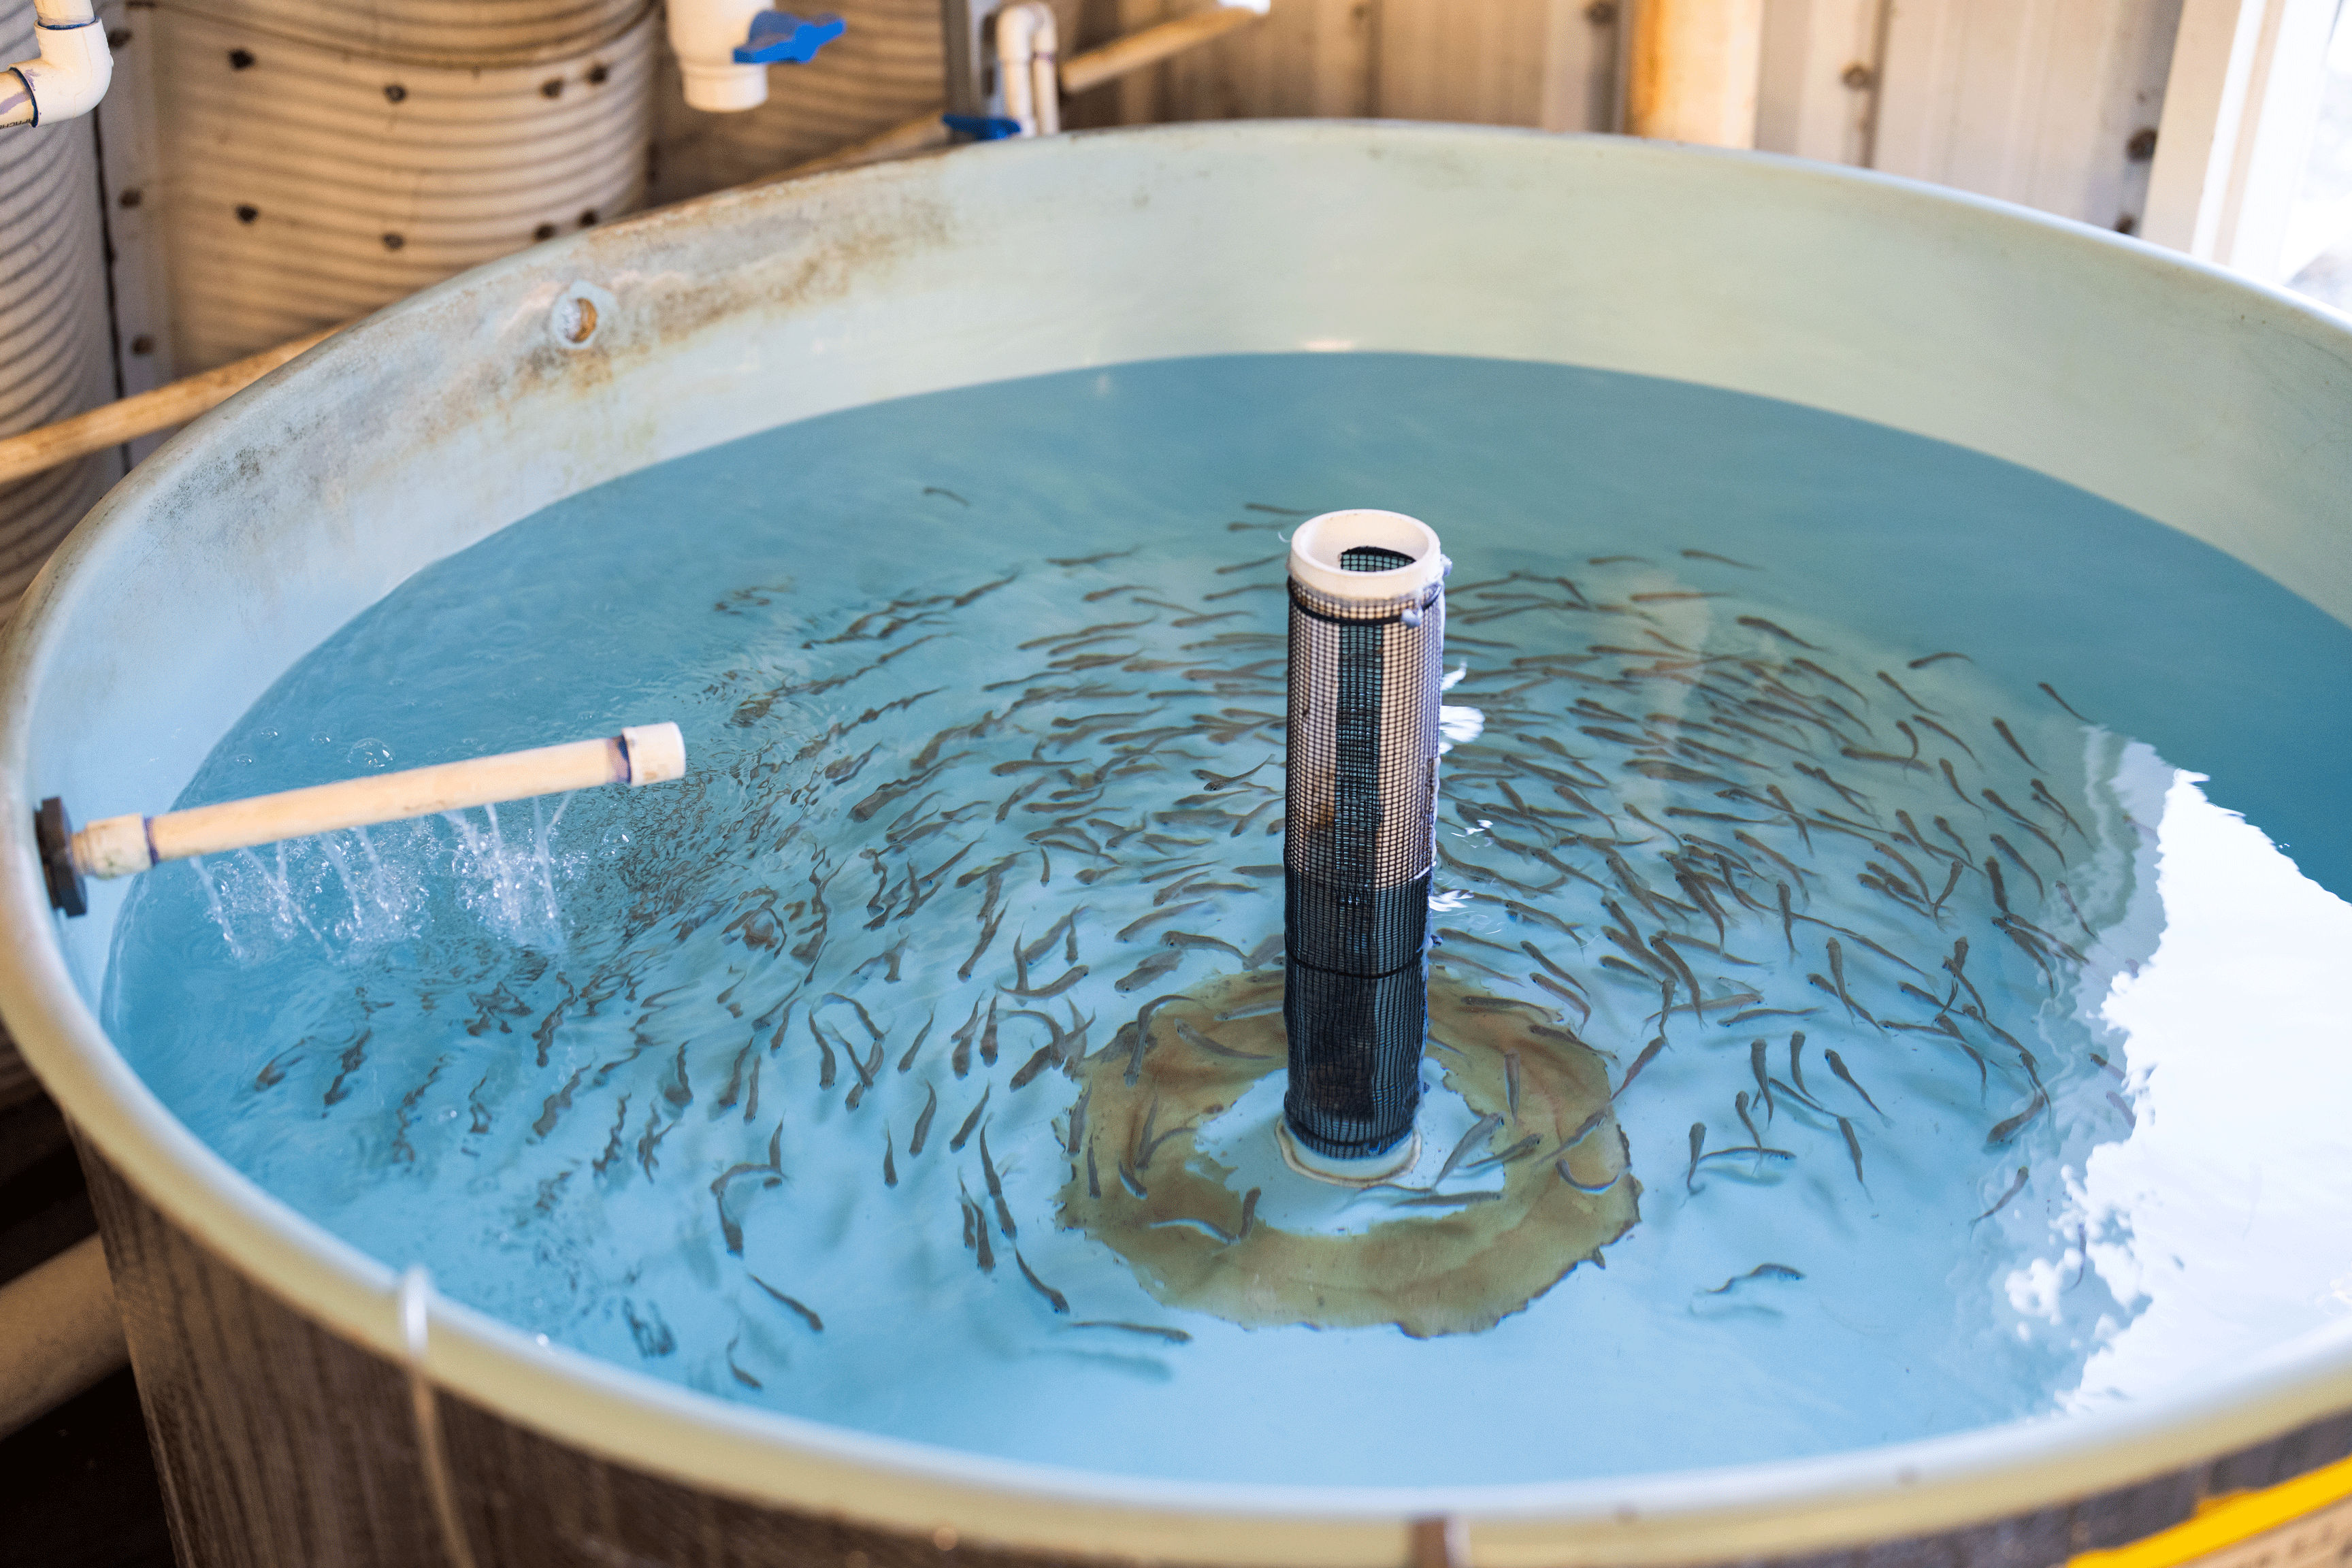 Hundreds of juvenile spring-run Chinook salmon are being housing at the UC Davis Center for Aquatic Biology and Aquaculture to safeguard the threatened species, photo by: Jael Mackendorf, UC Davis